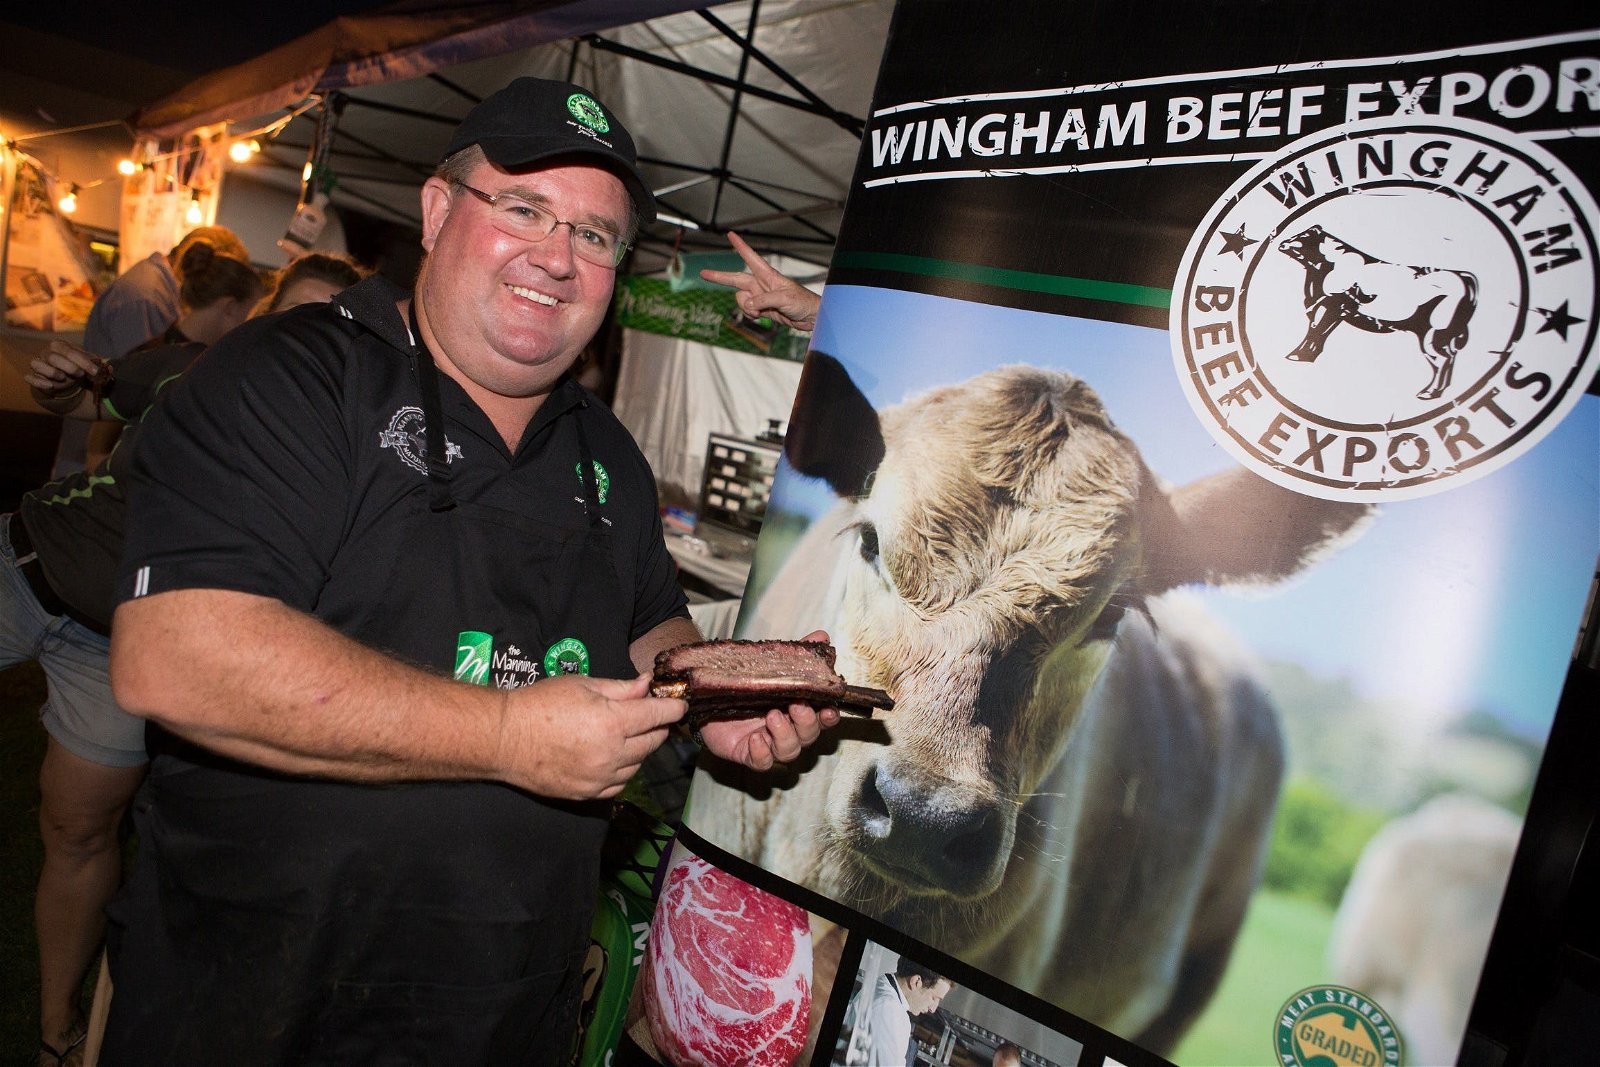 Wingham Beef Exports - Broome Tourism